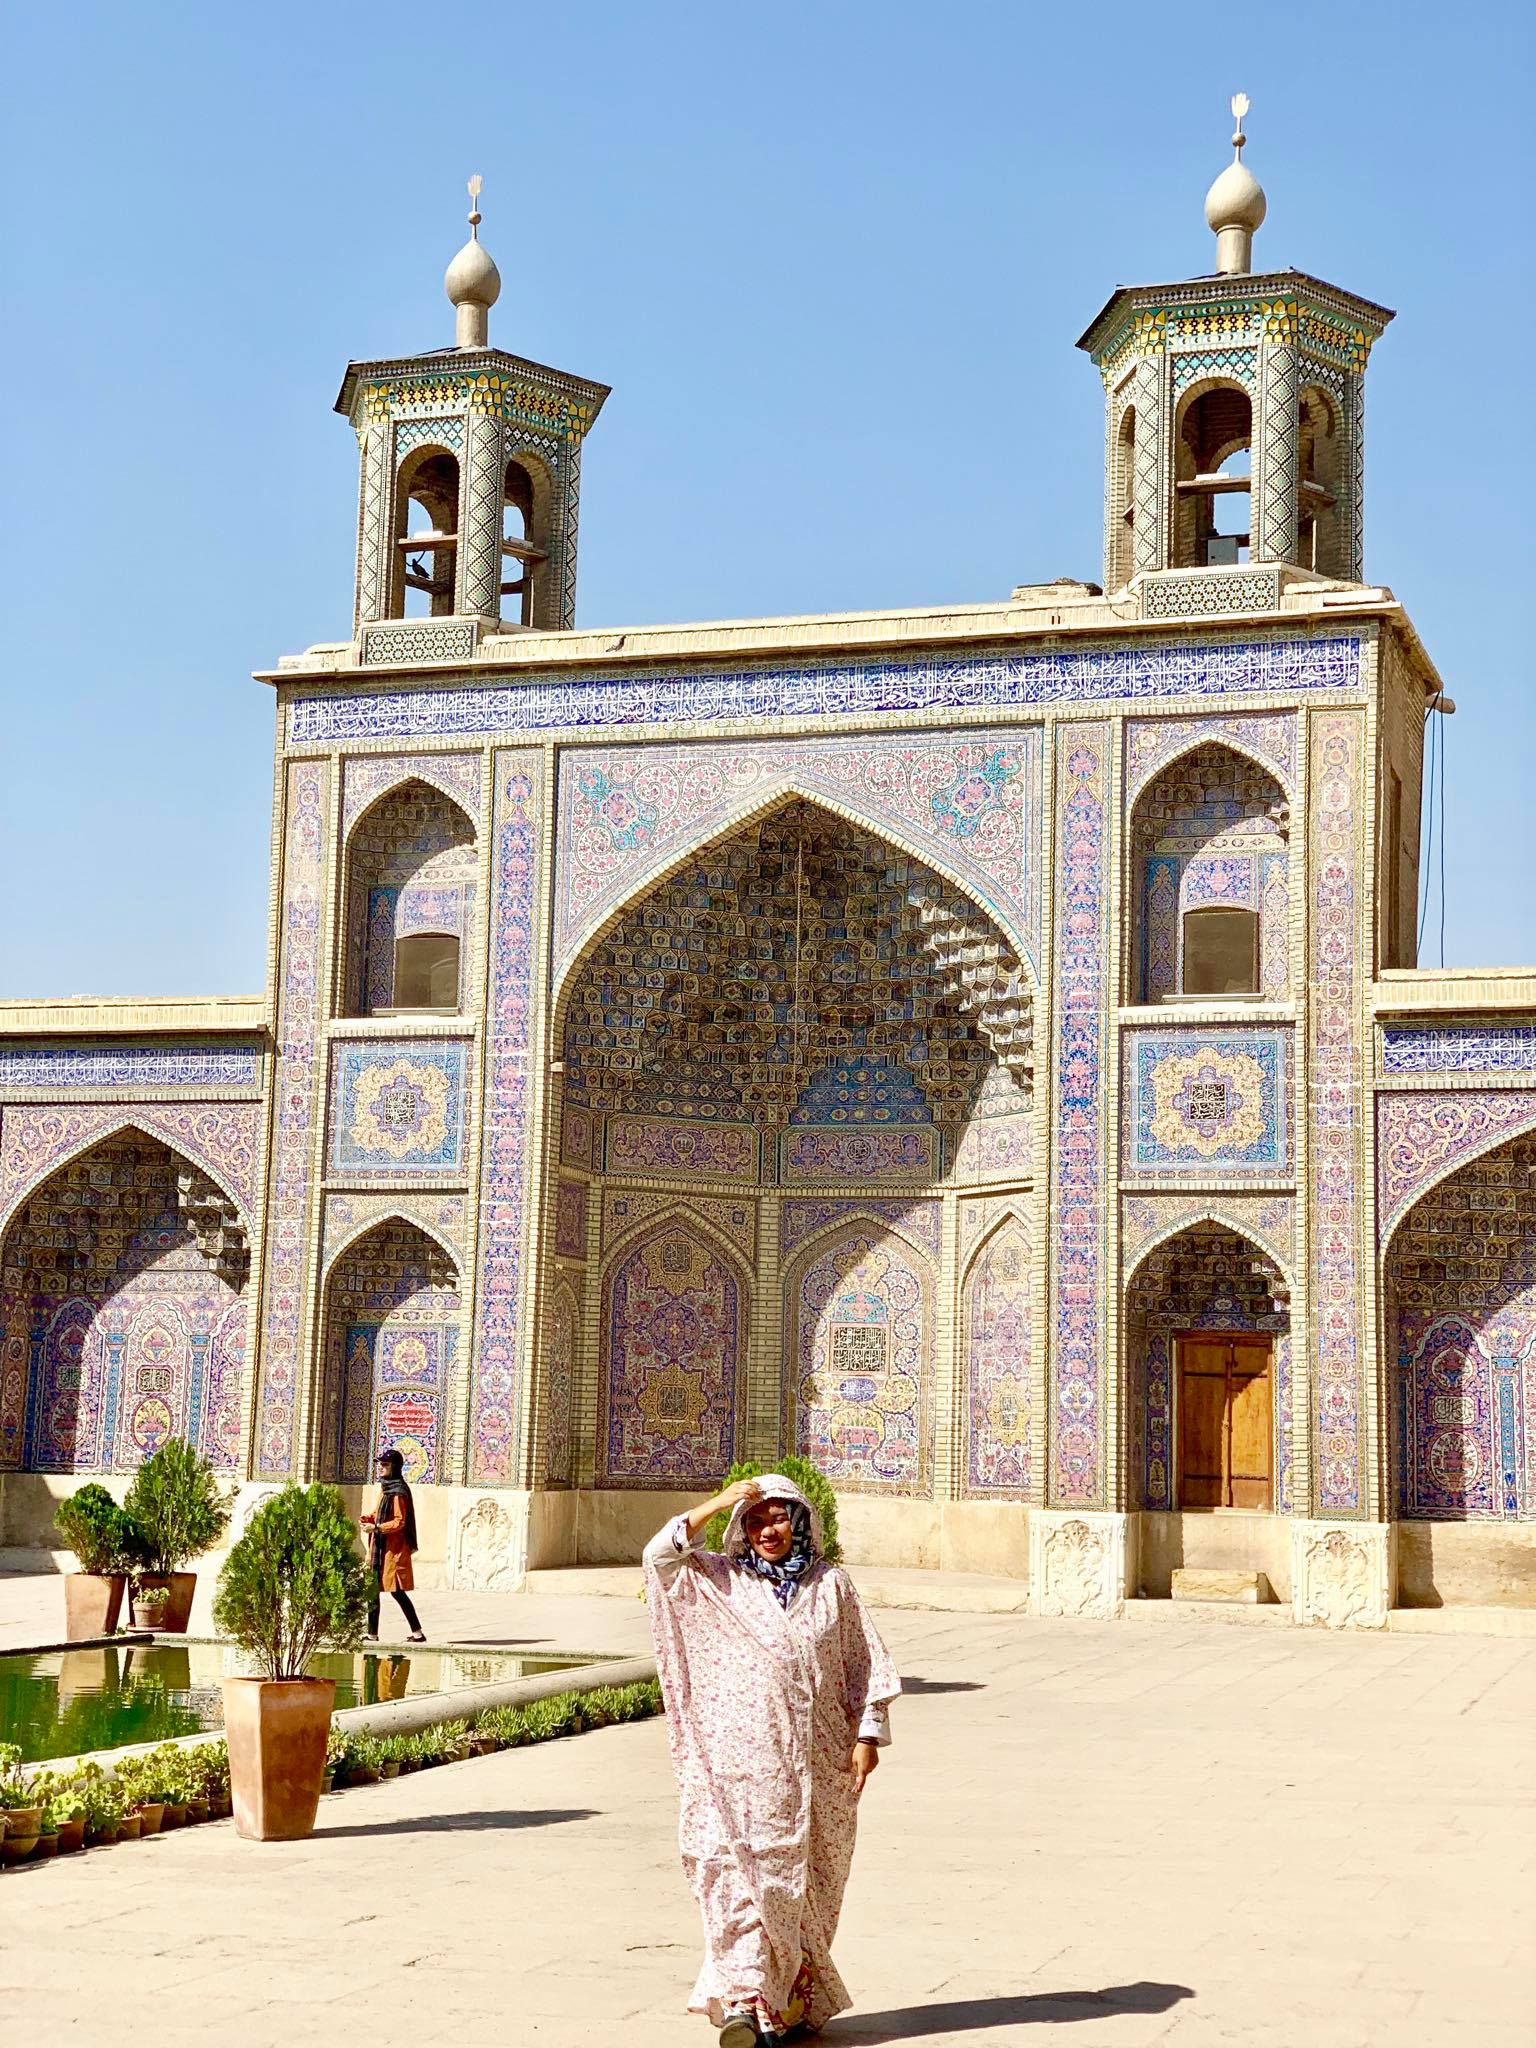 Kach Solo Travels in 2019 Full day tour of Shiraz32.jpg